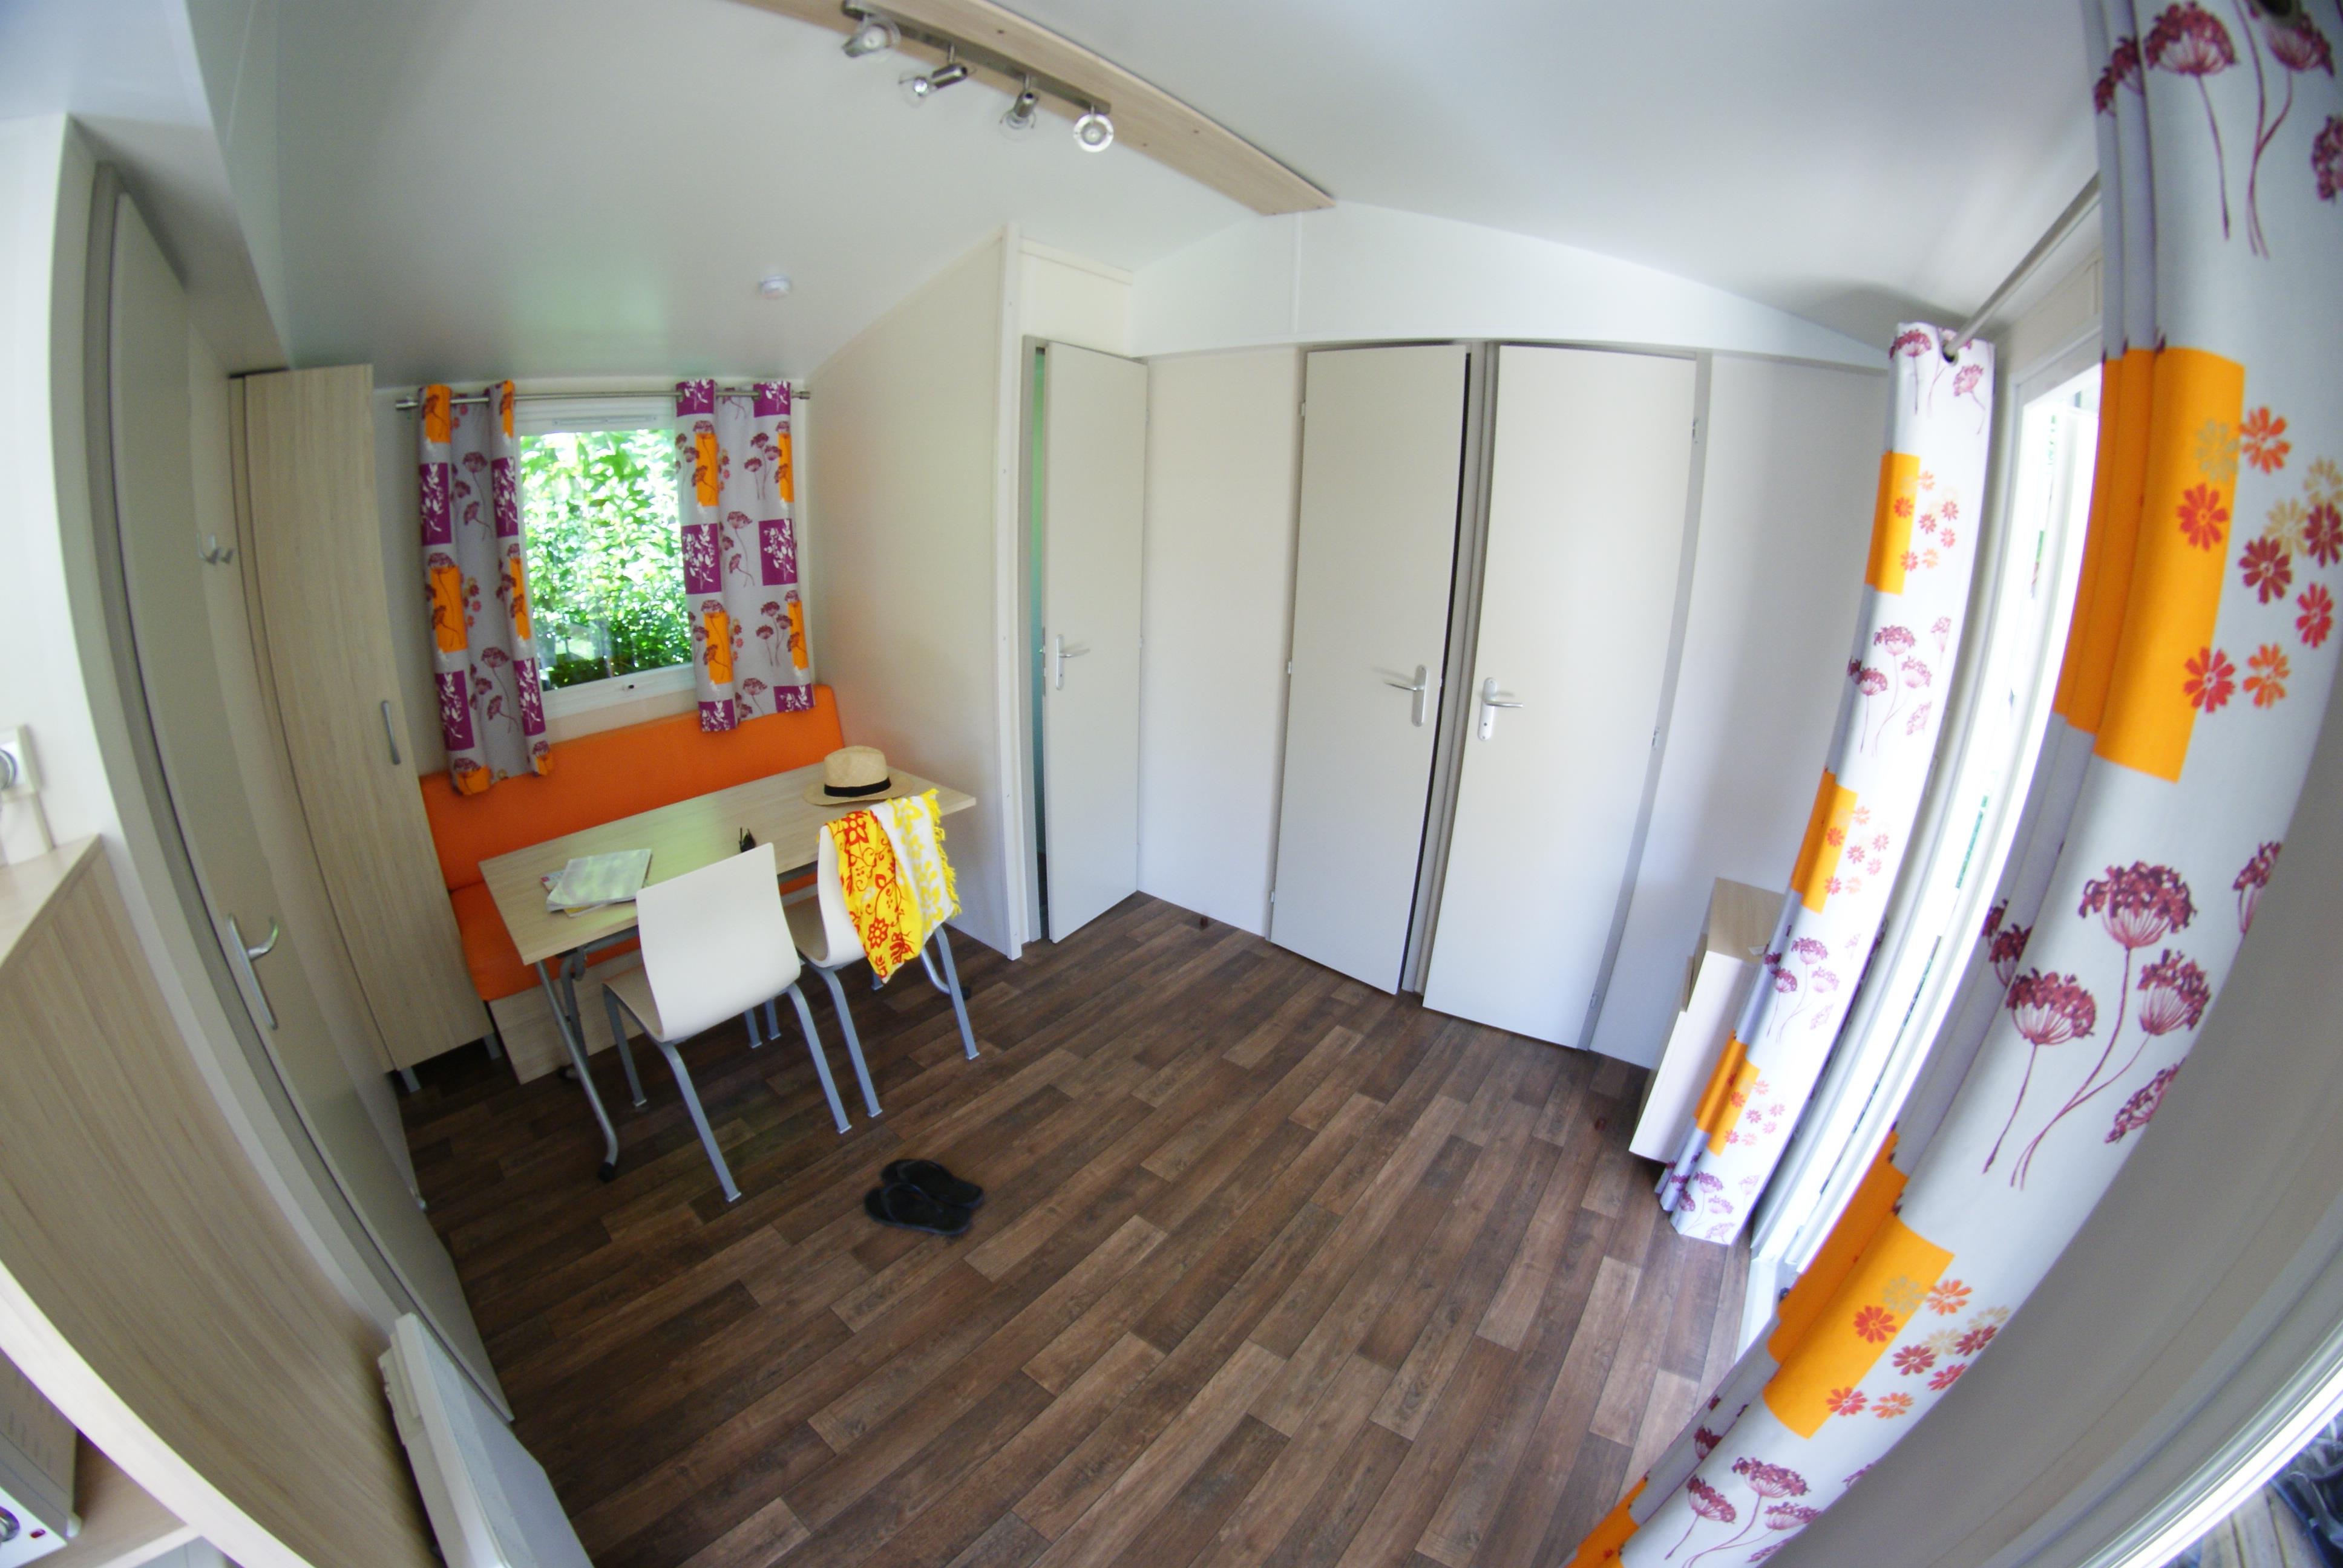 Accommodation - Mobile Home Super Mercure Riviera 27.50M² 2 Bedrooms - Camping les Fontaines